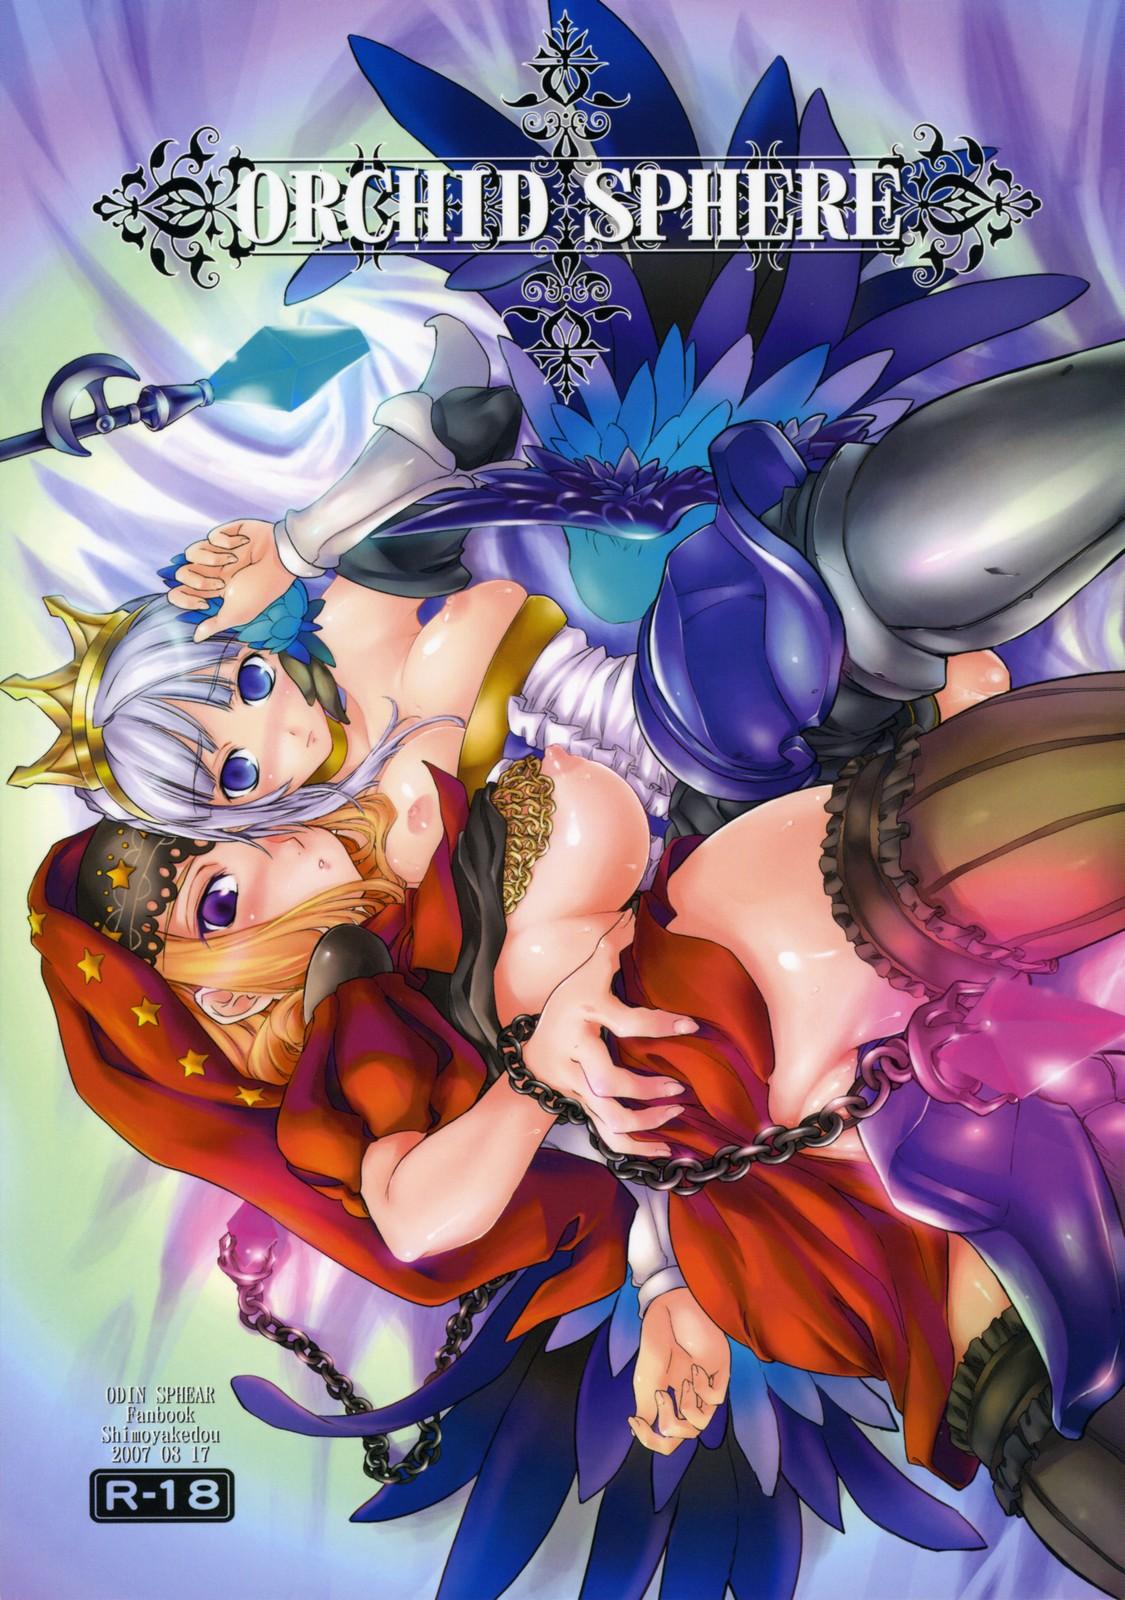 Hijab Orchid Sphere - Odin sphere Asstomouth - Page 1